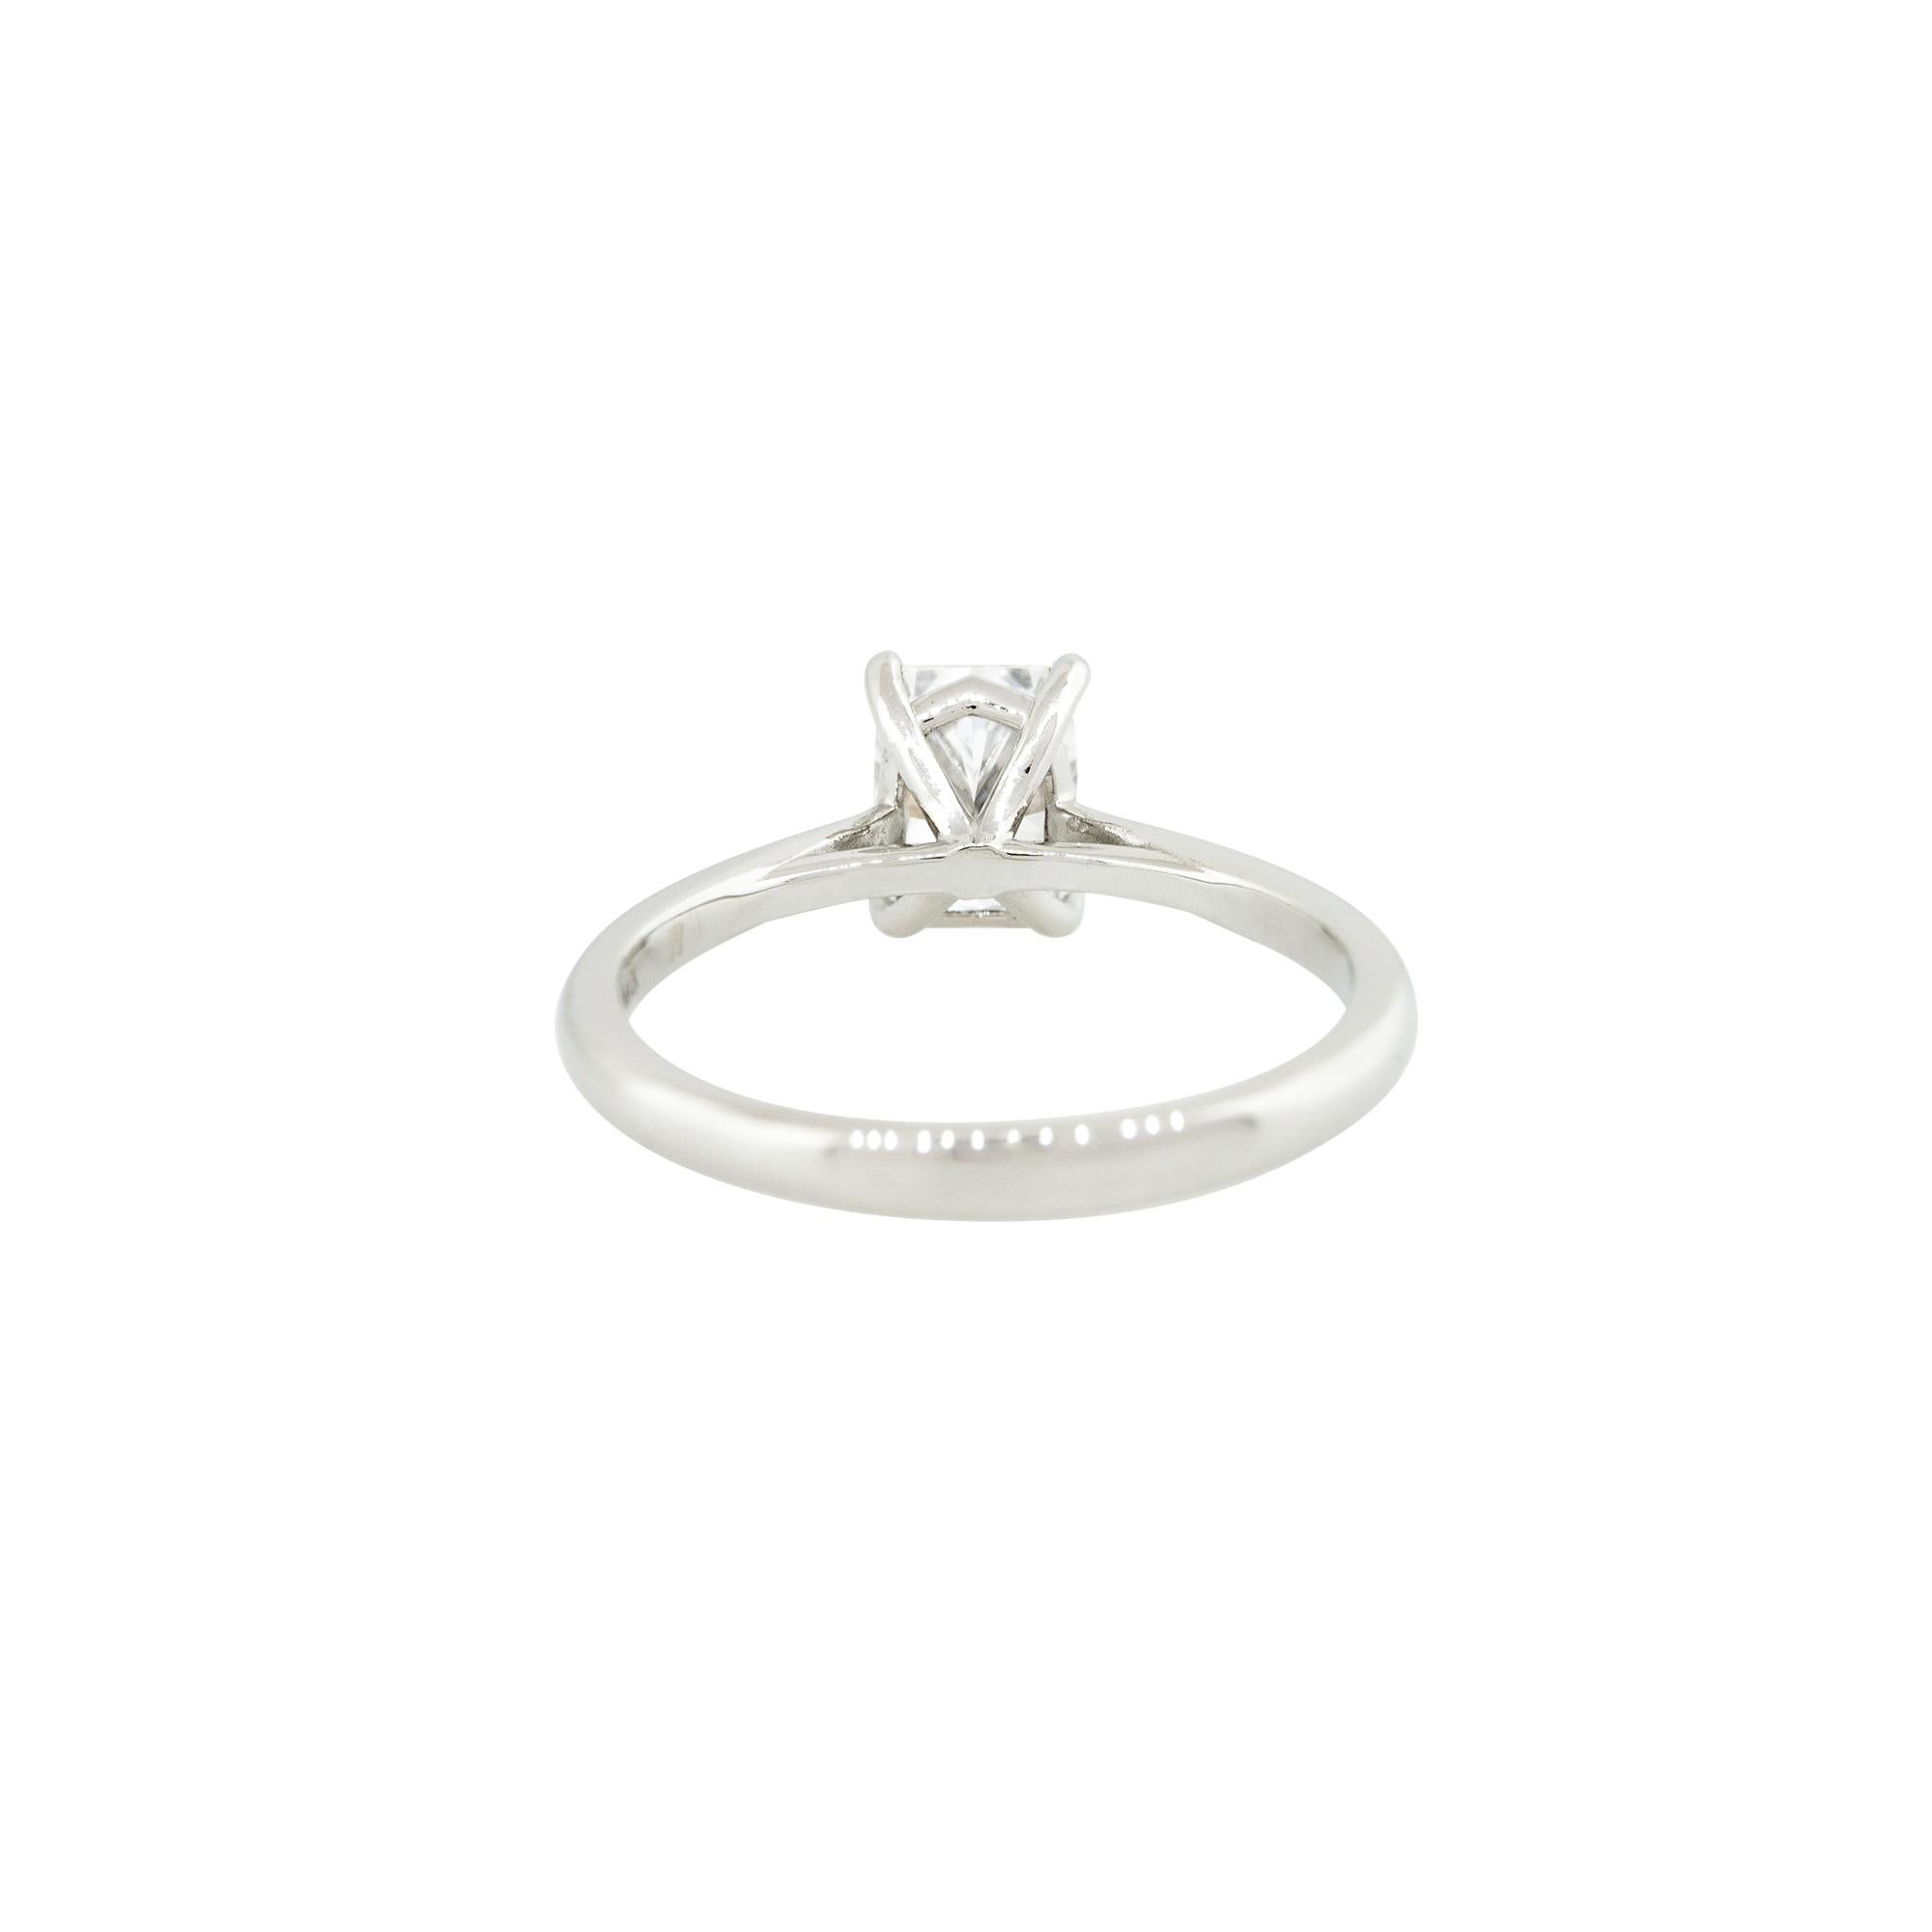 Women's GIA Certified 1.20 Carat Radiant Cut Diamond Engagement Ring Platinum in Stock For Sale